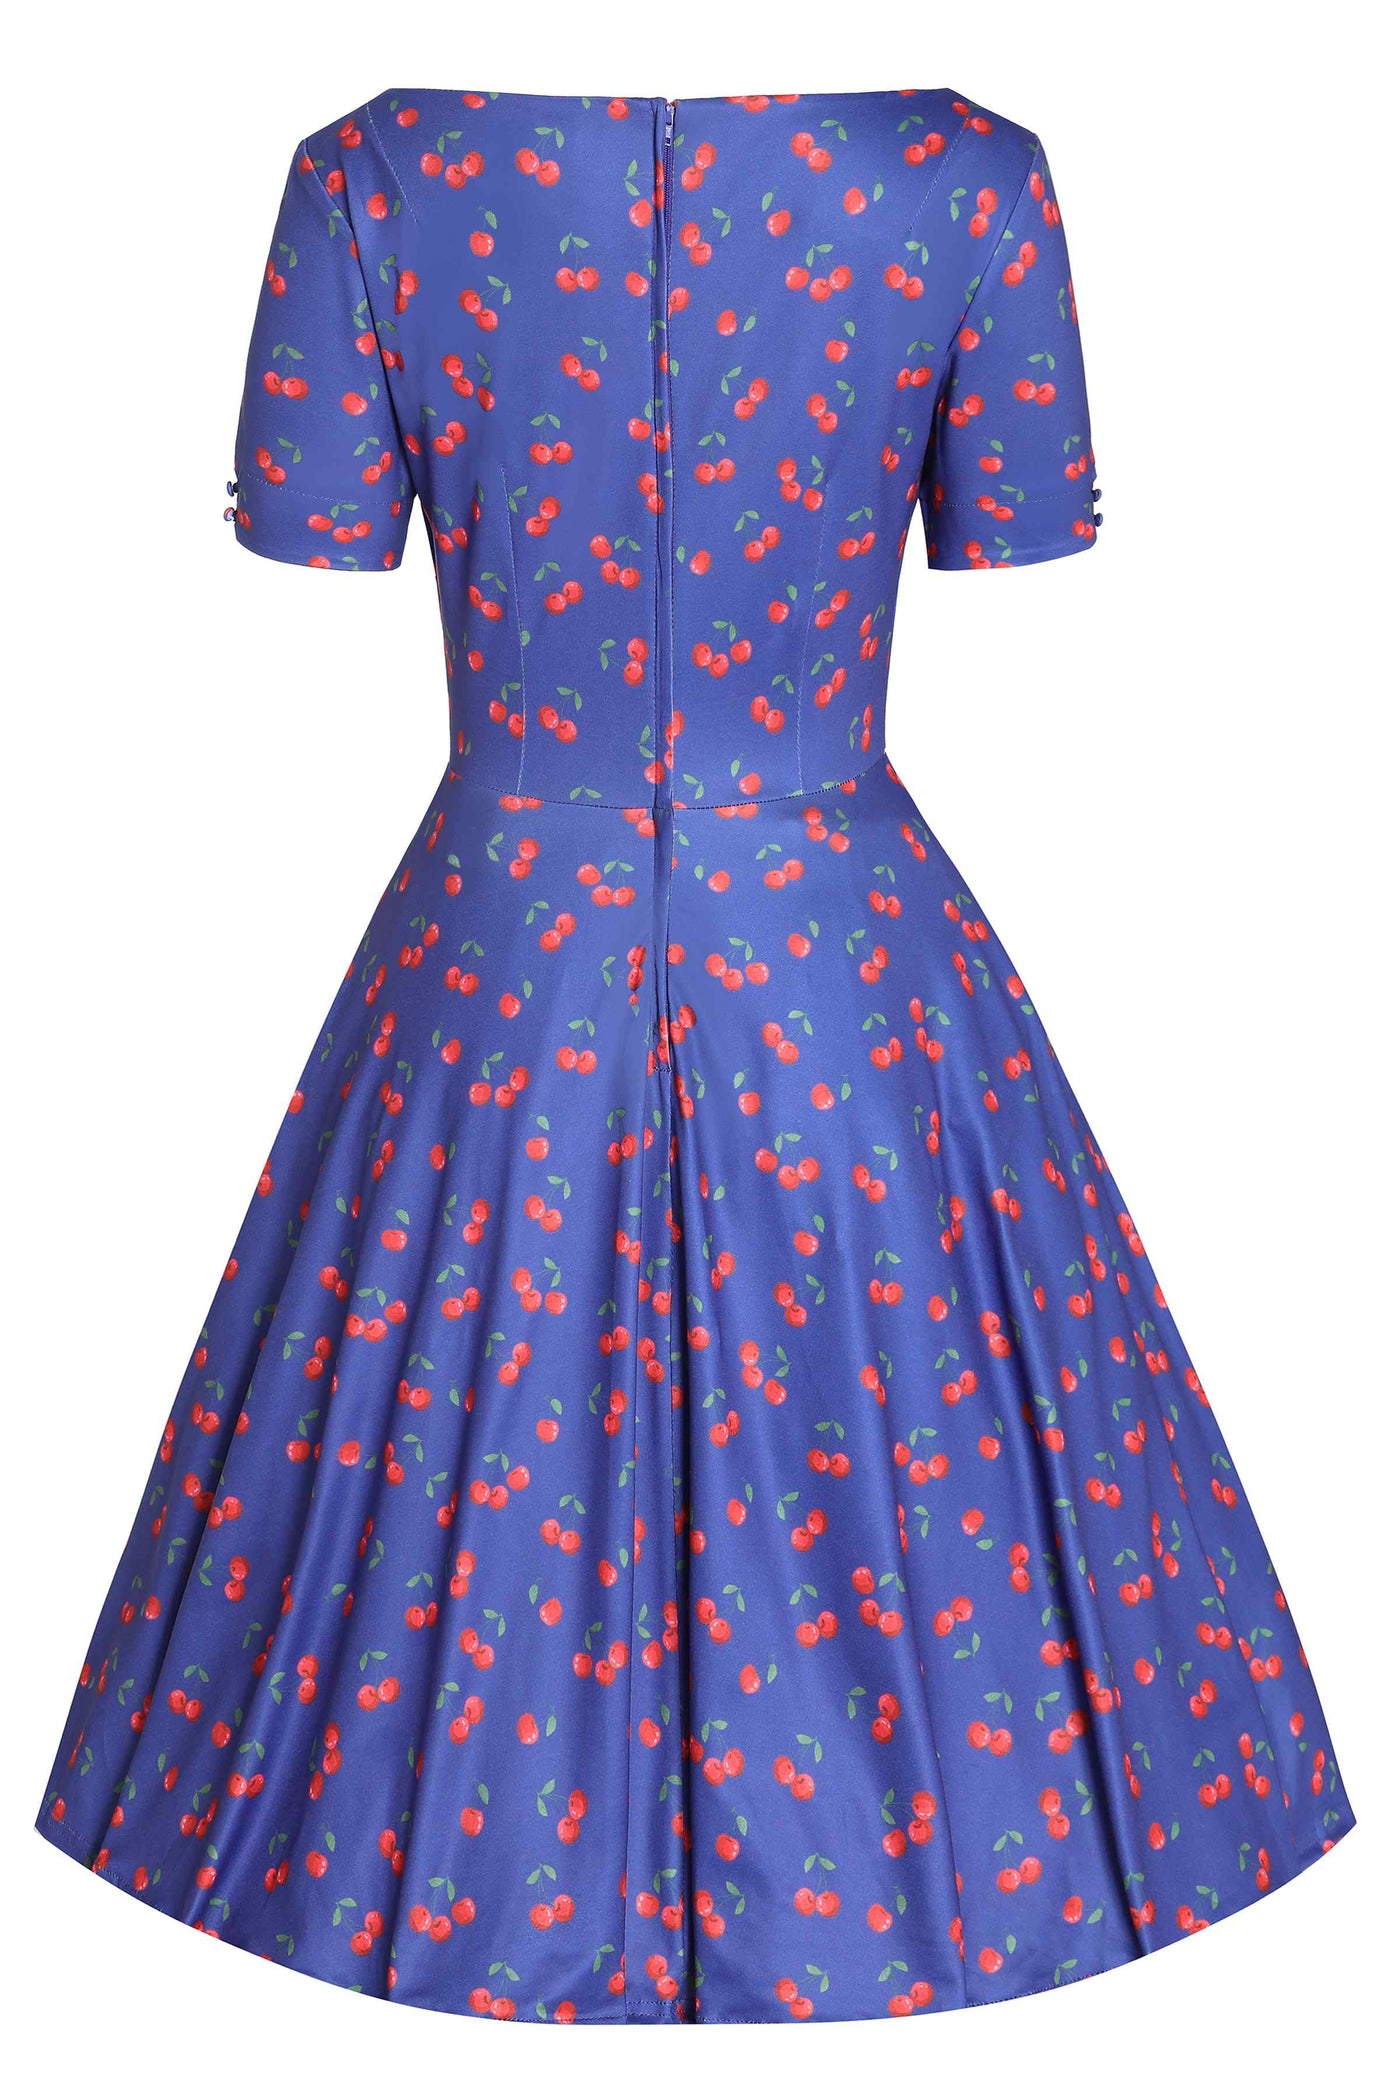 Back view of Cherry Print Flared Dress in Blue